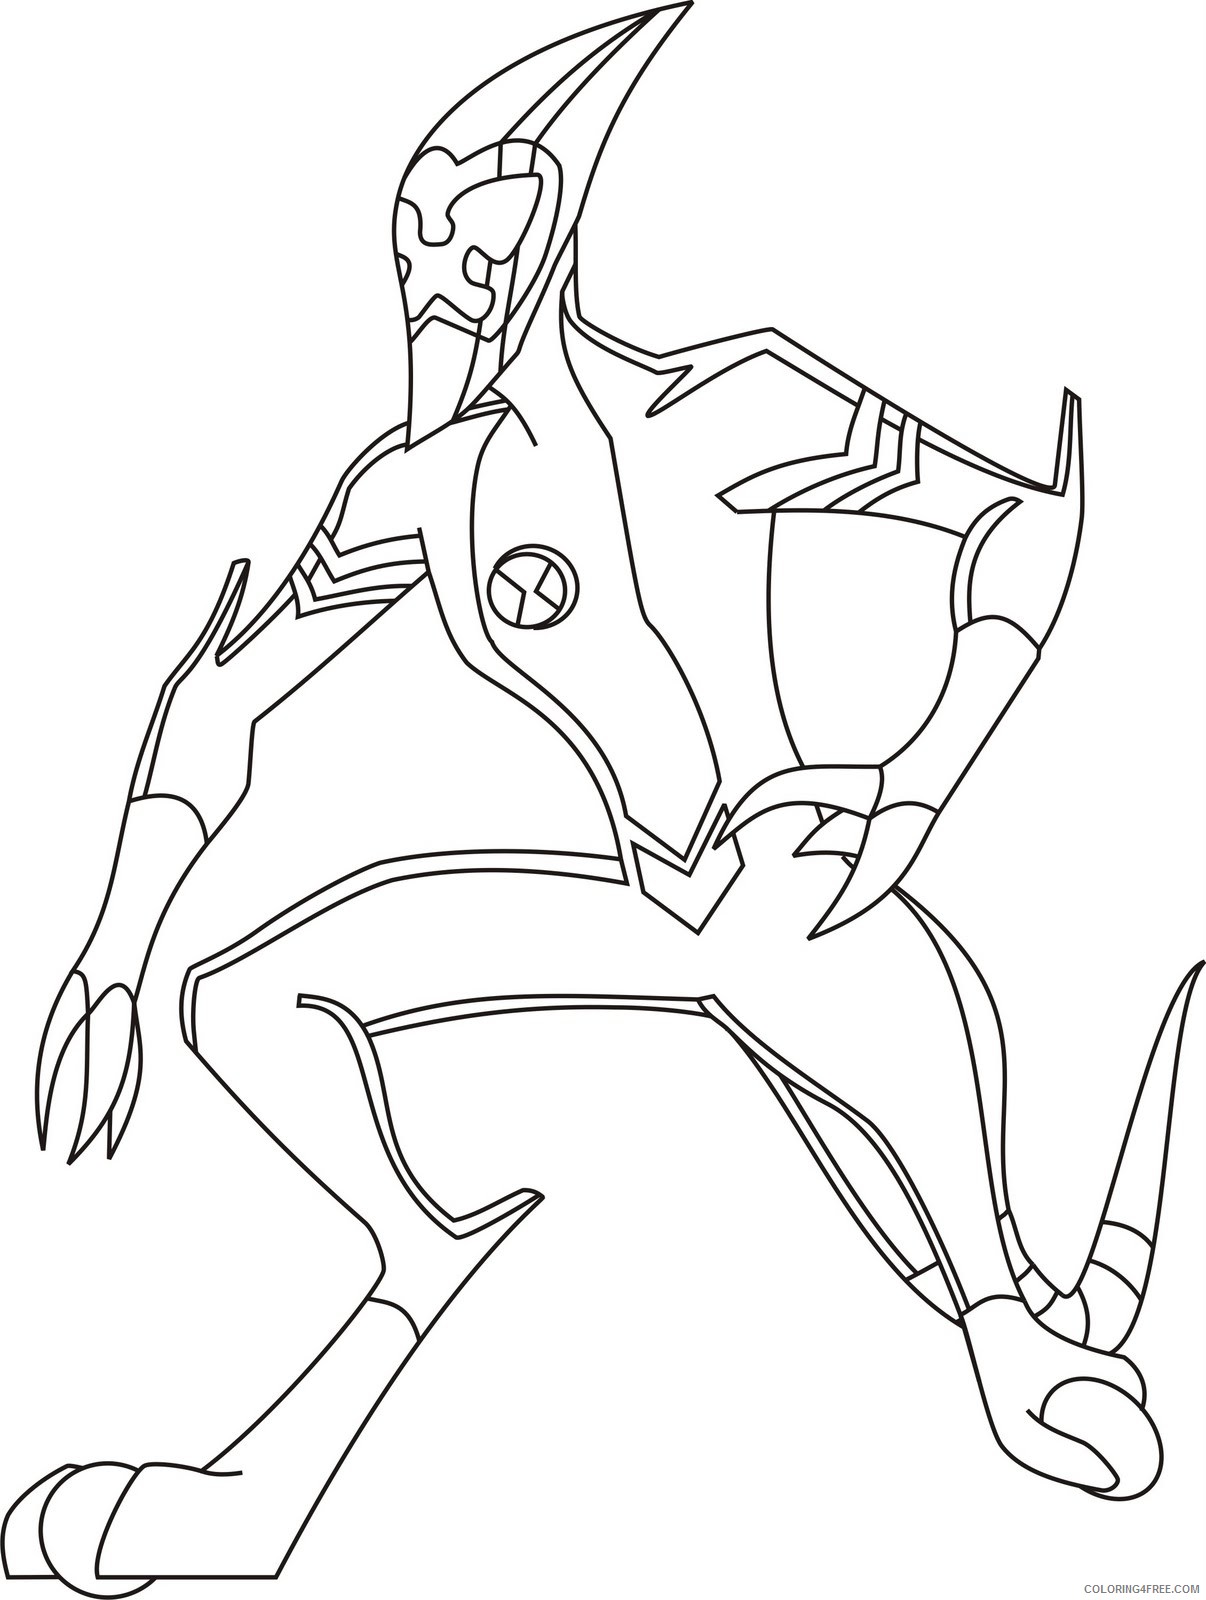 ben 10 coloring pages xlr8 Coloring4free - Coloring4Free.com